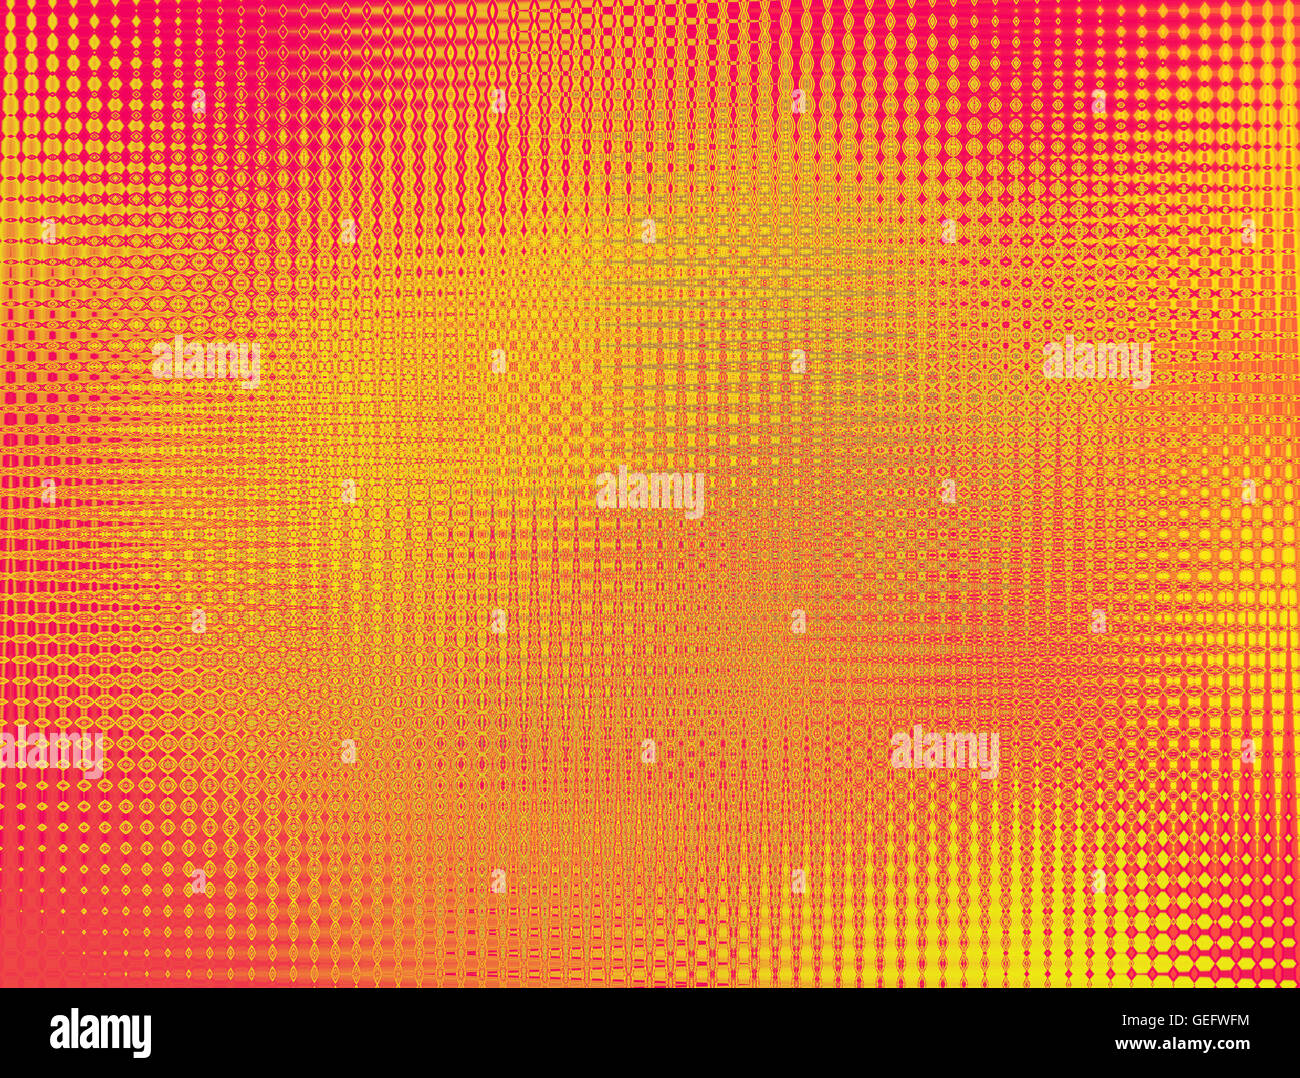 Bright original abstract background in yellow and red tones Stock Photo